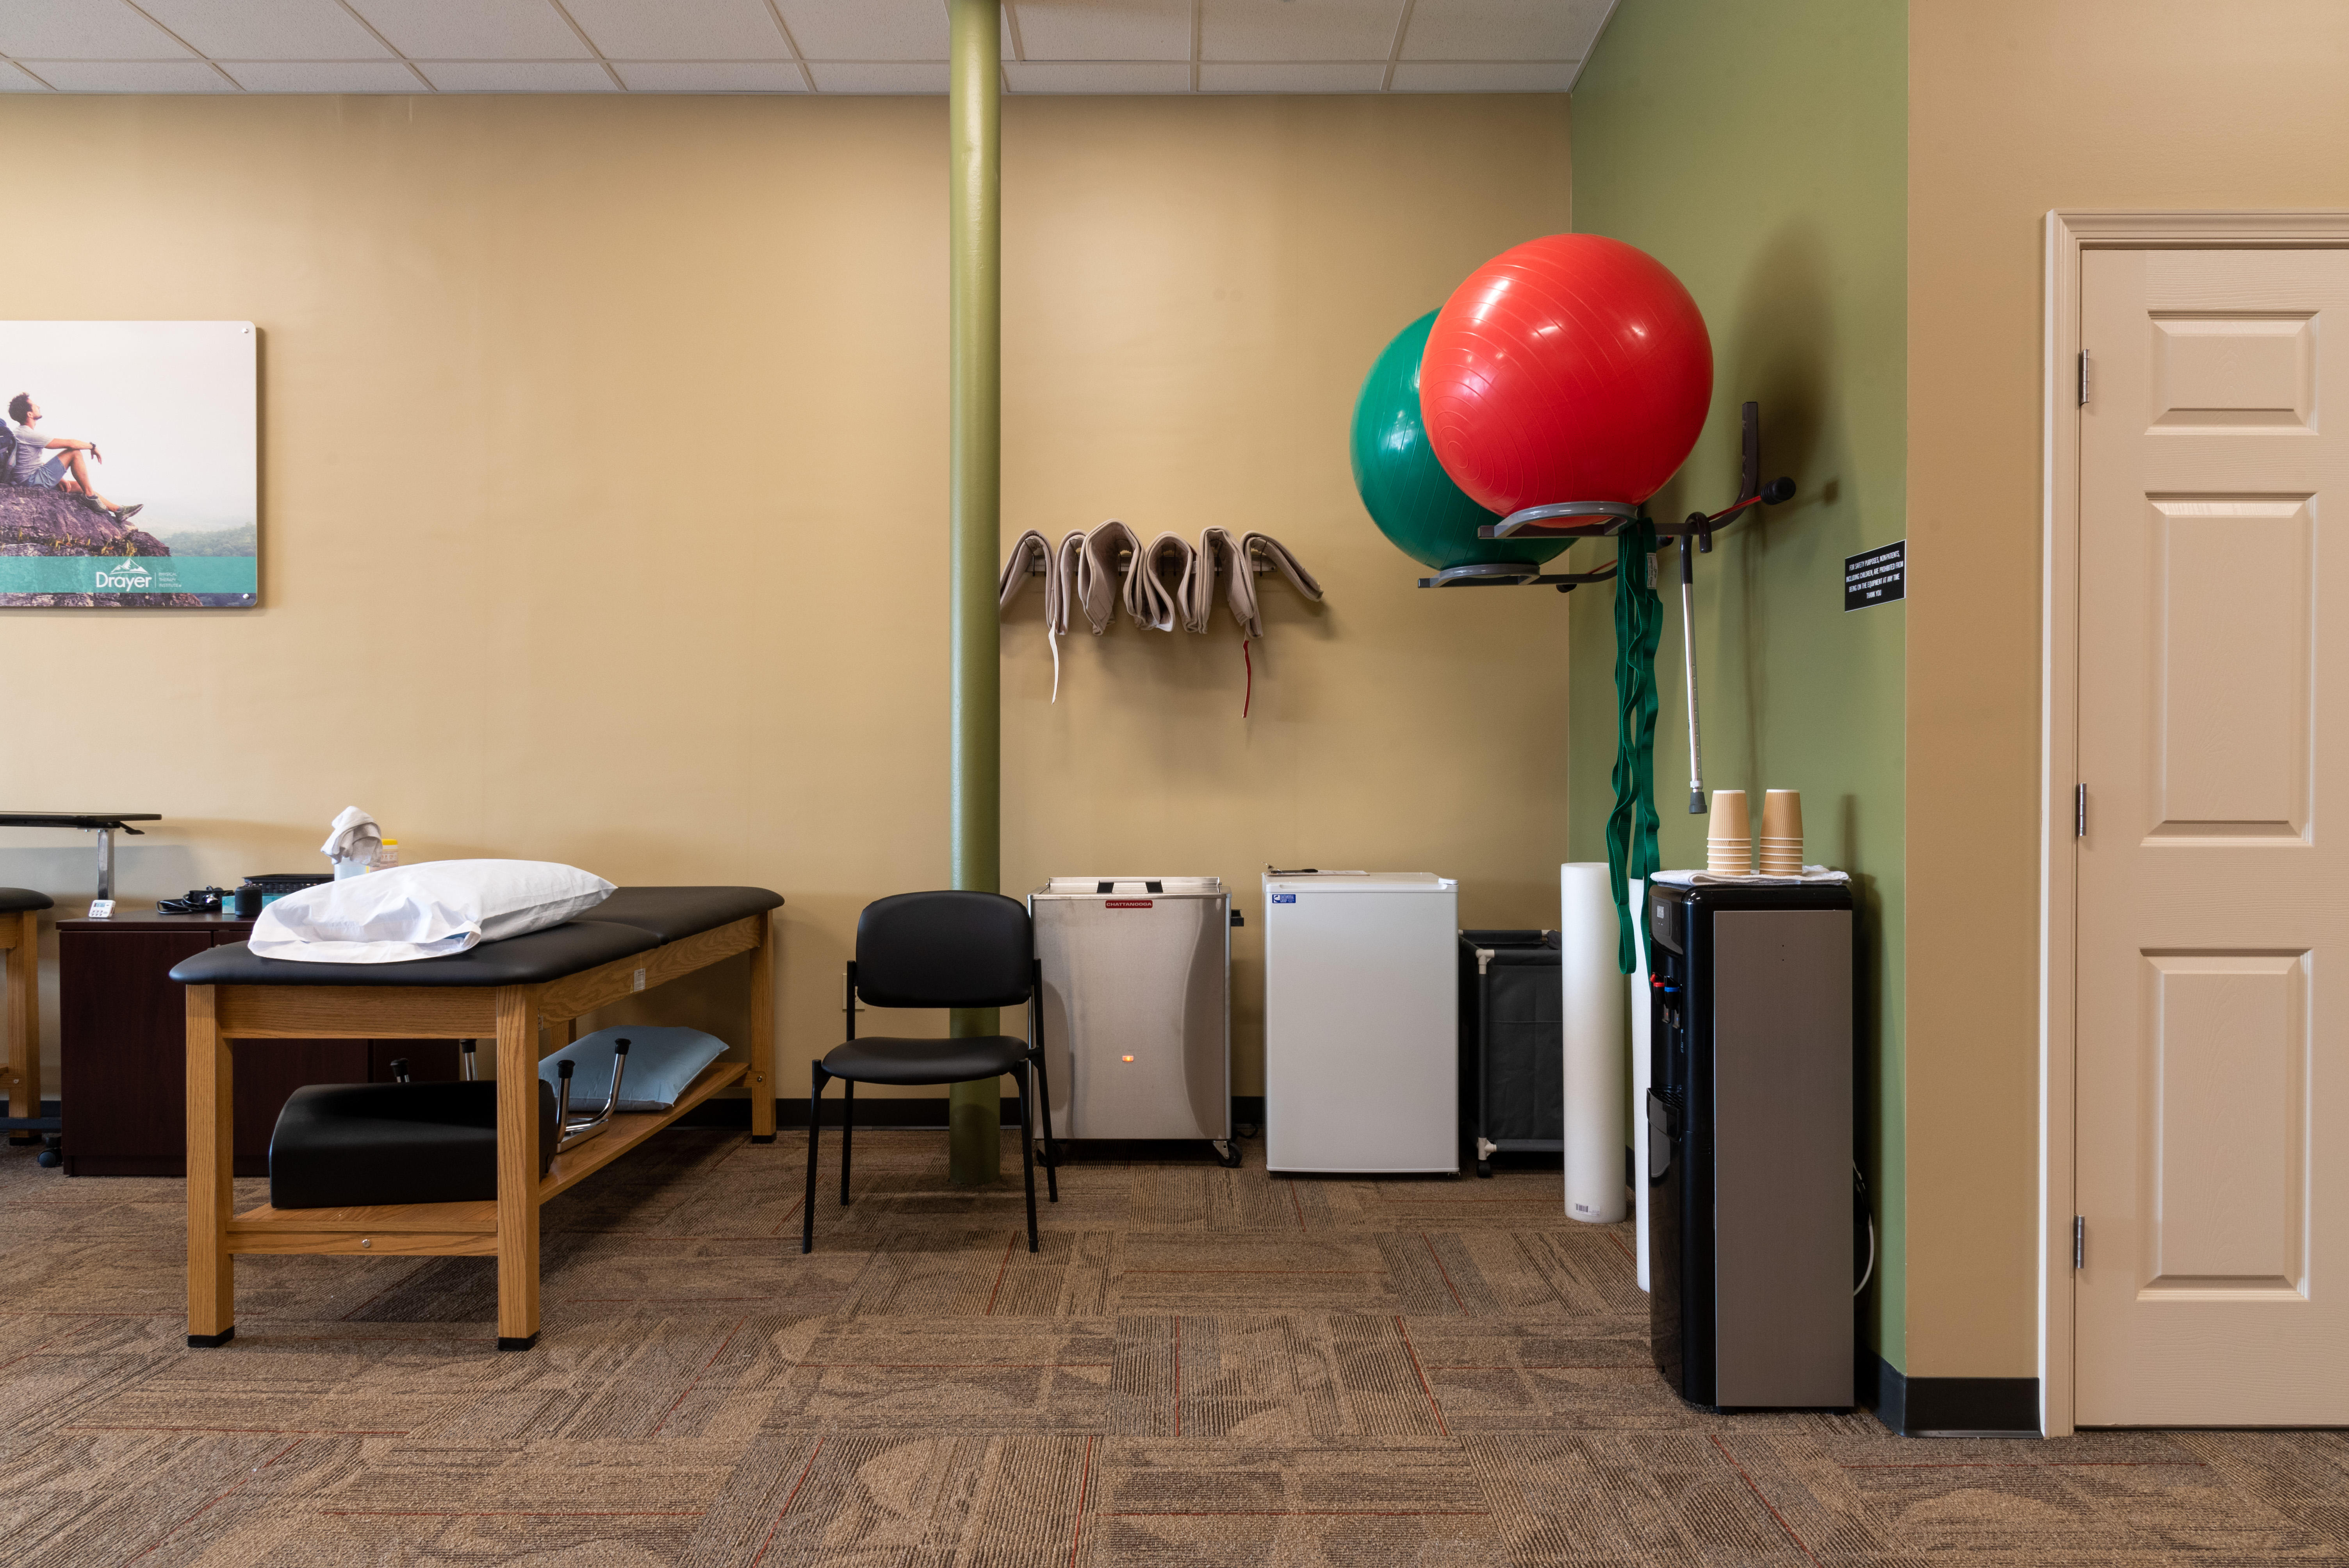 Image 2 | Drayer Physical Therapy Institute